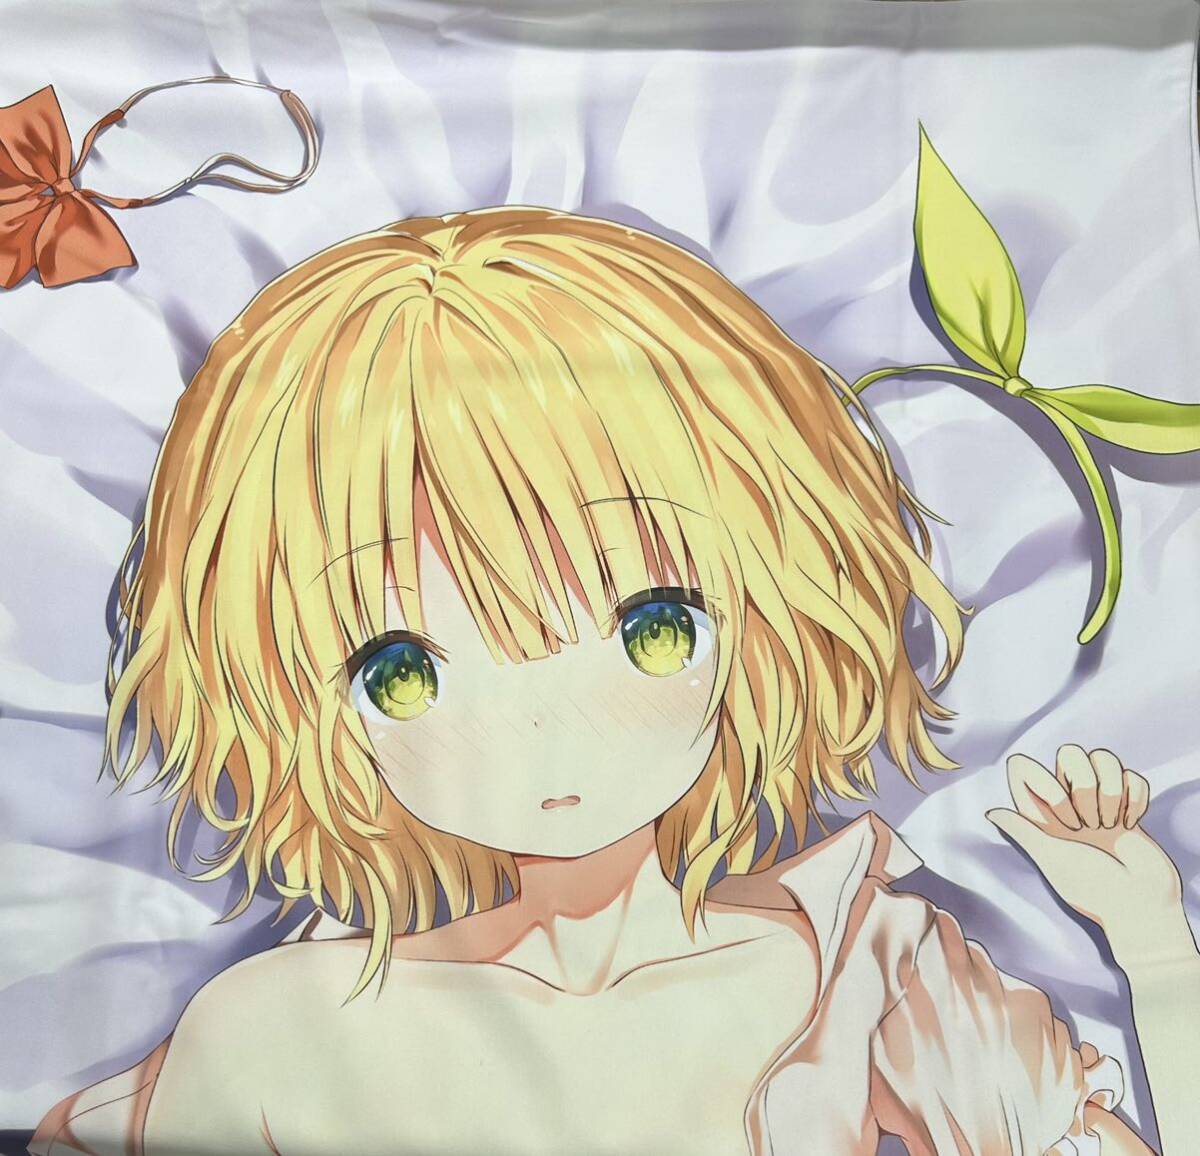 1 start regular goods used possible love ... change . also liking . become give .?. flower Dakimakura cover Like to long 